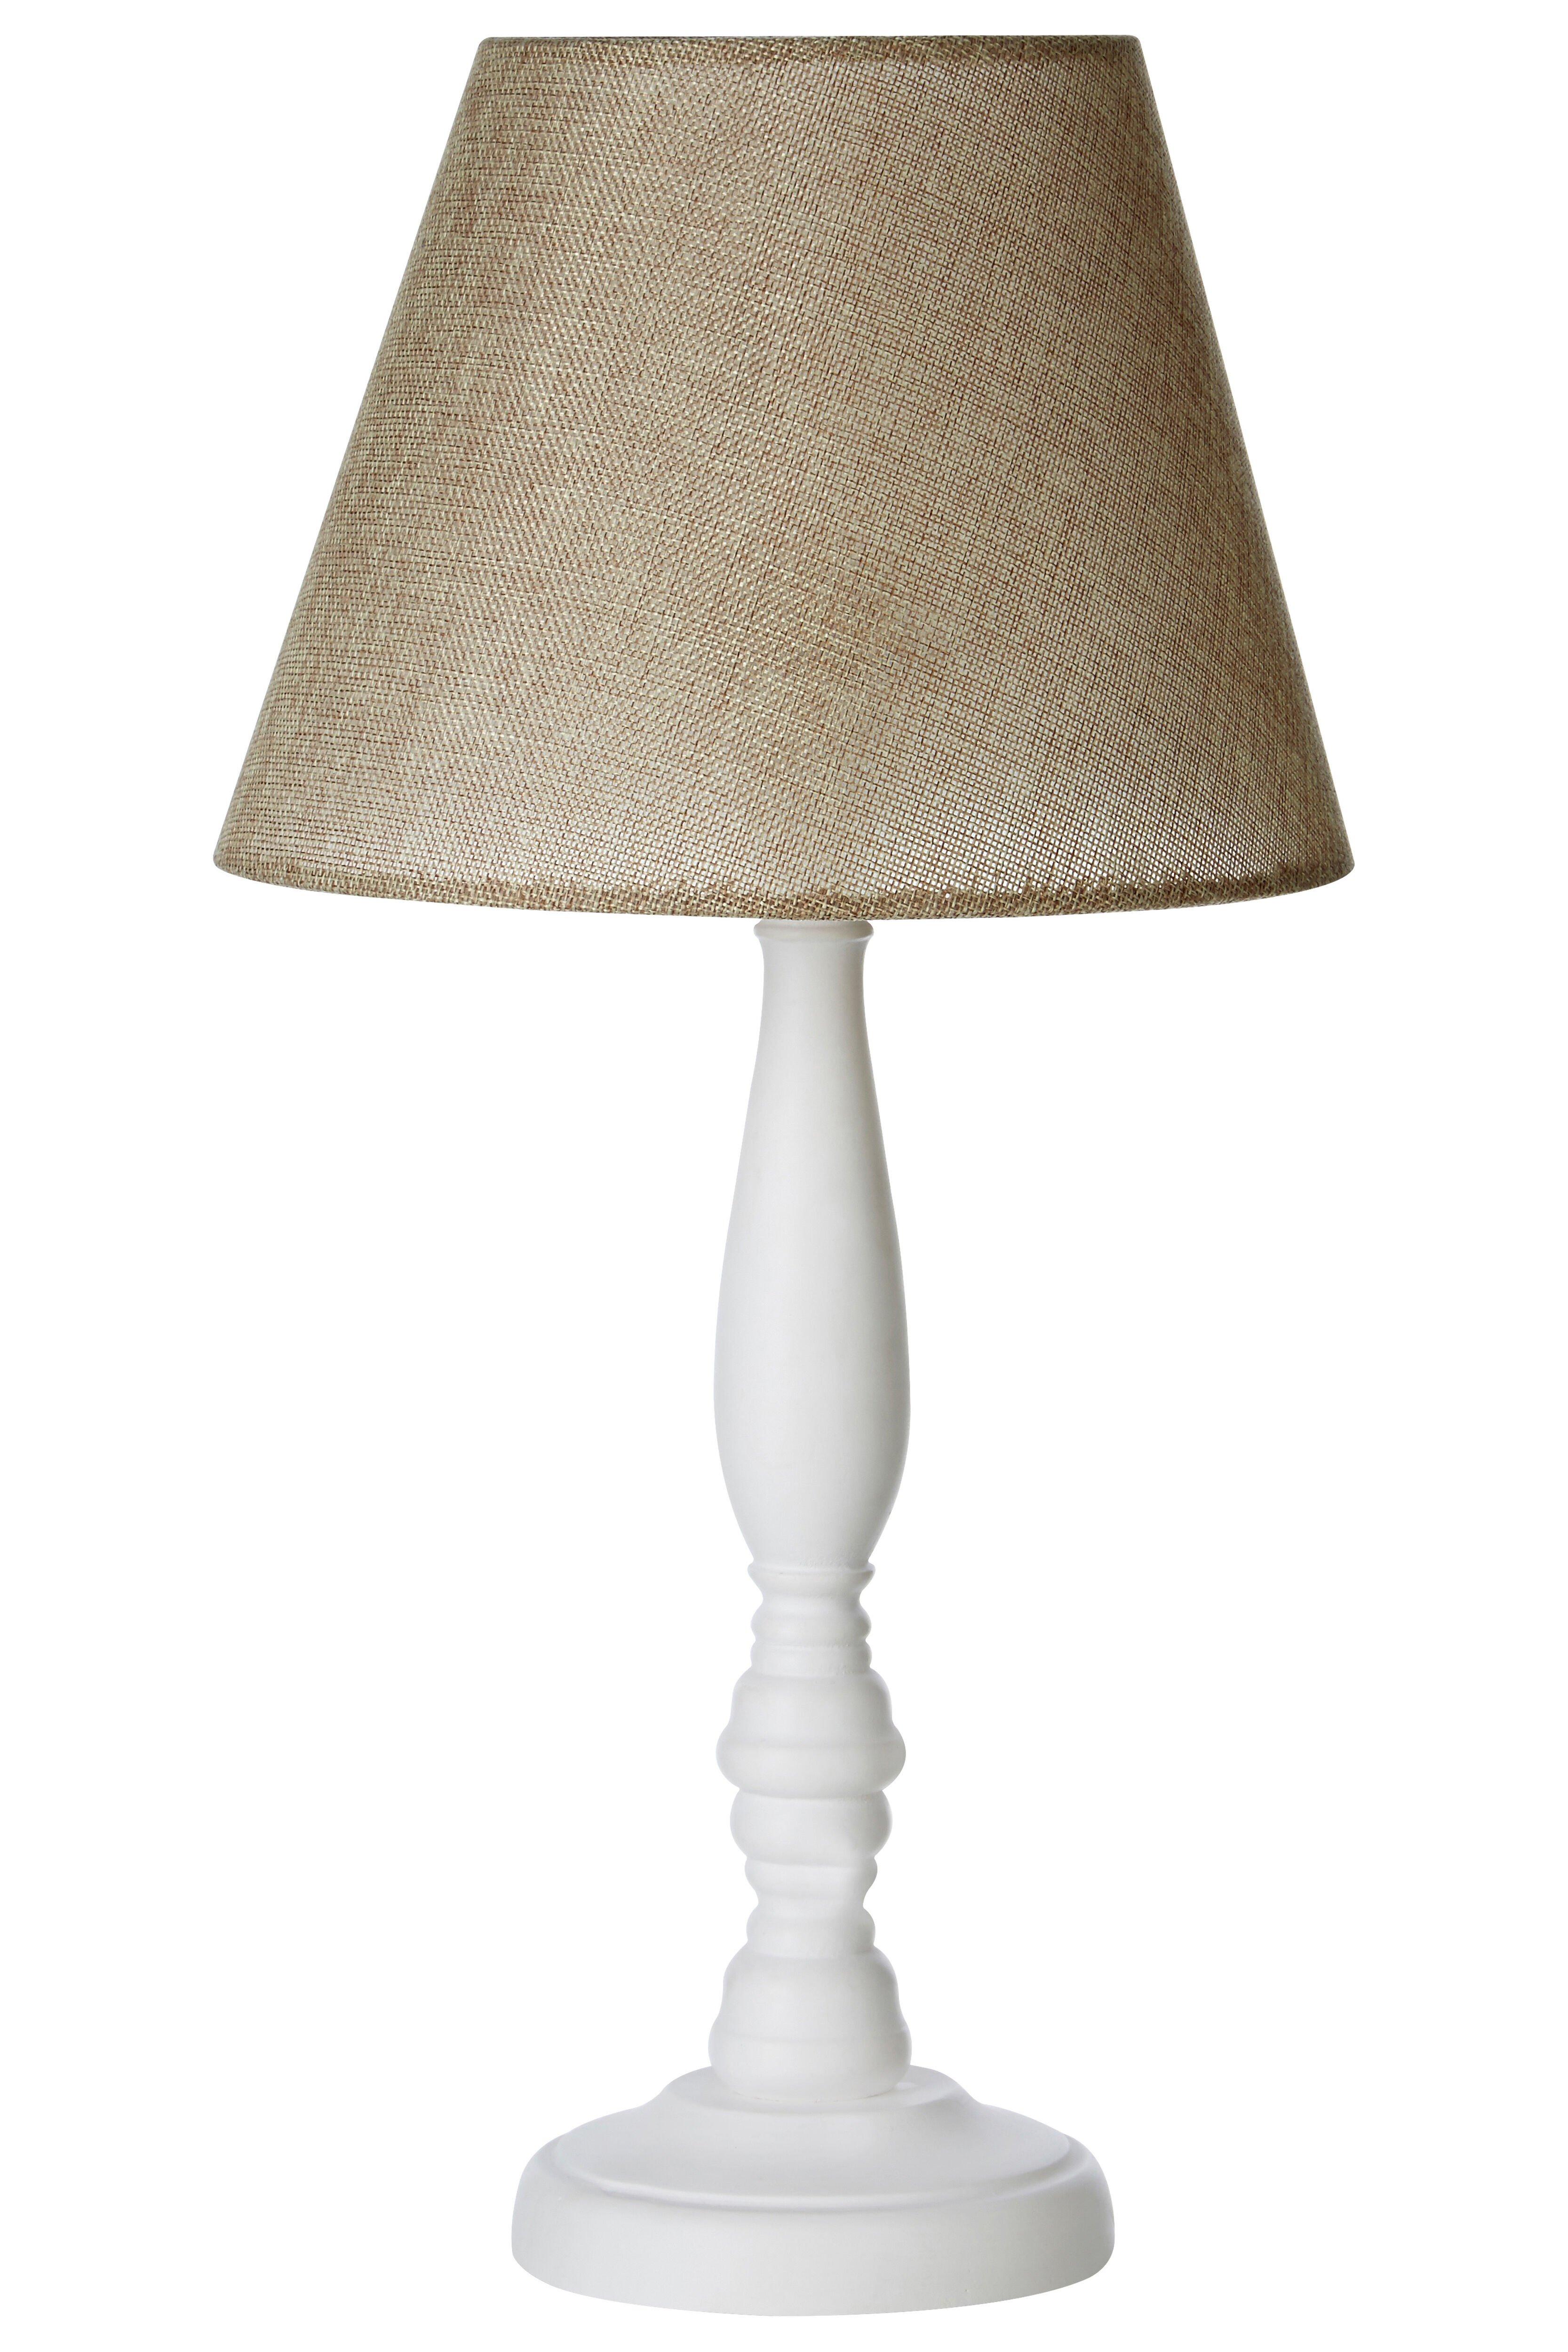 Interiors by Premier Maine Round Base Table Lamp with EU Plug